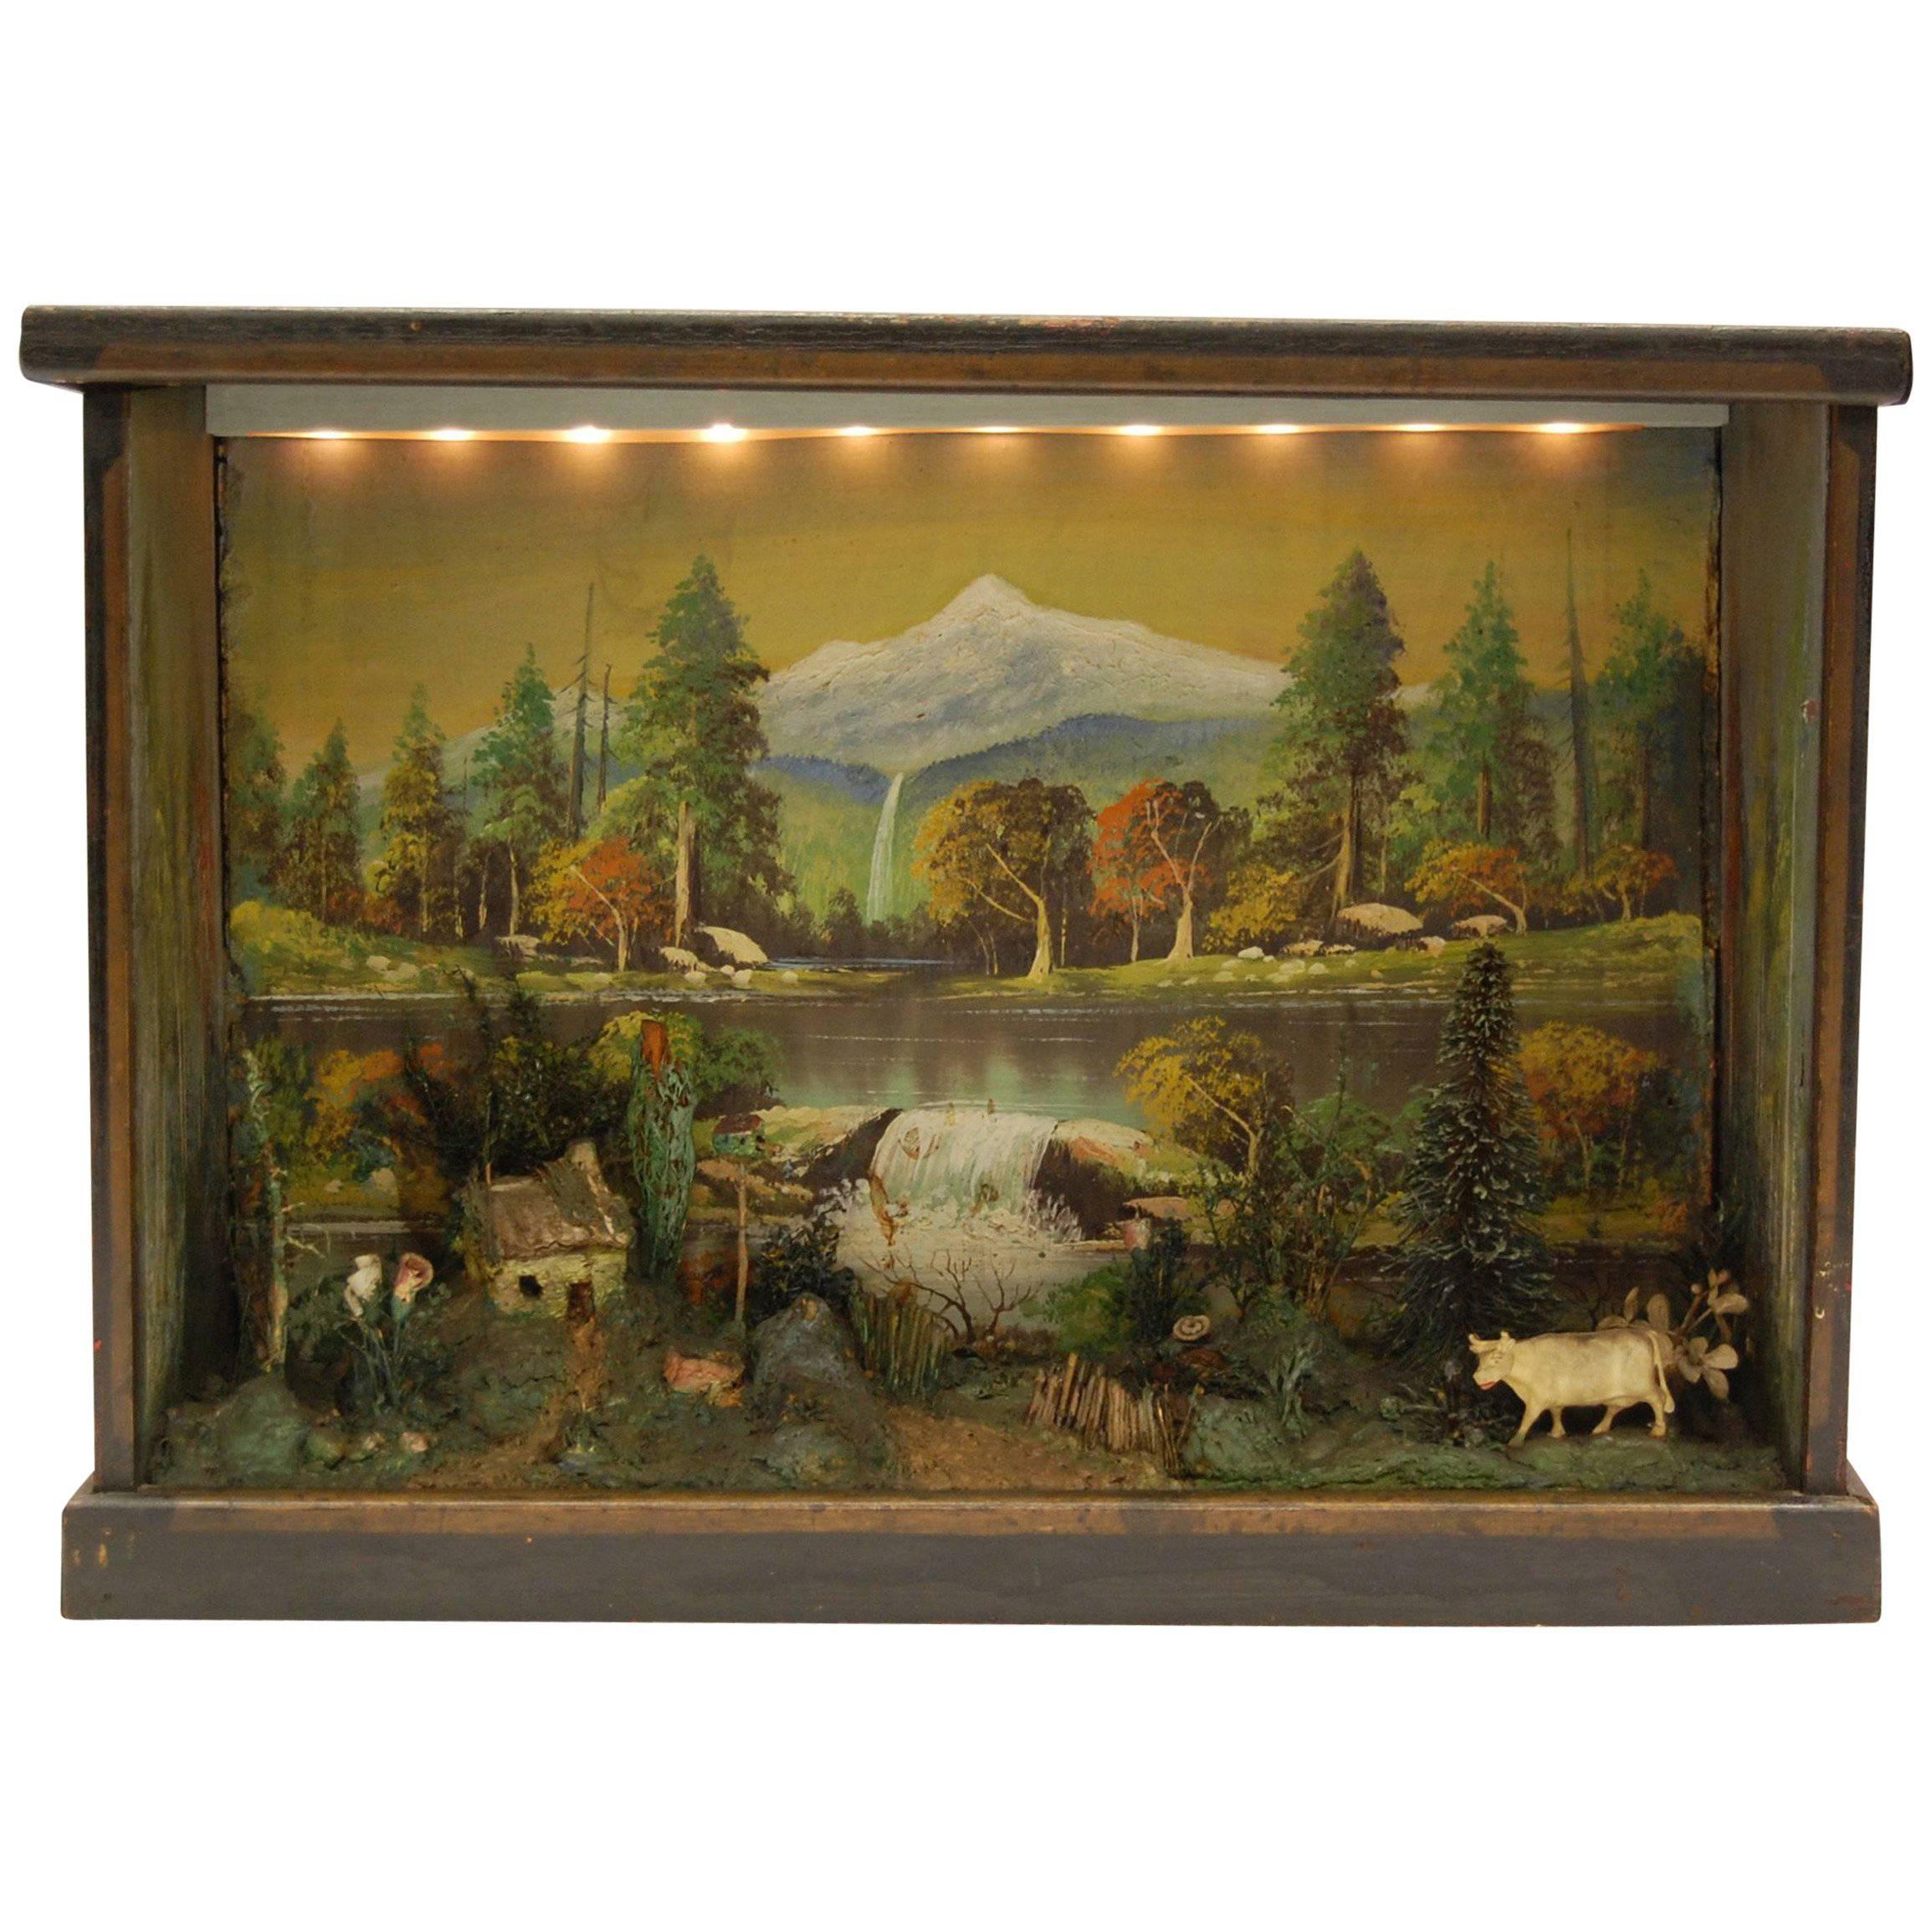 Antique Diorama of American Farm Scene with Cow, Farmhouse and Trees